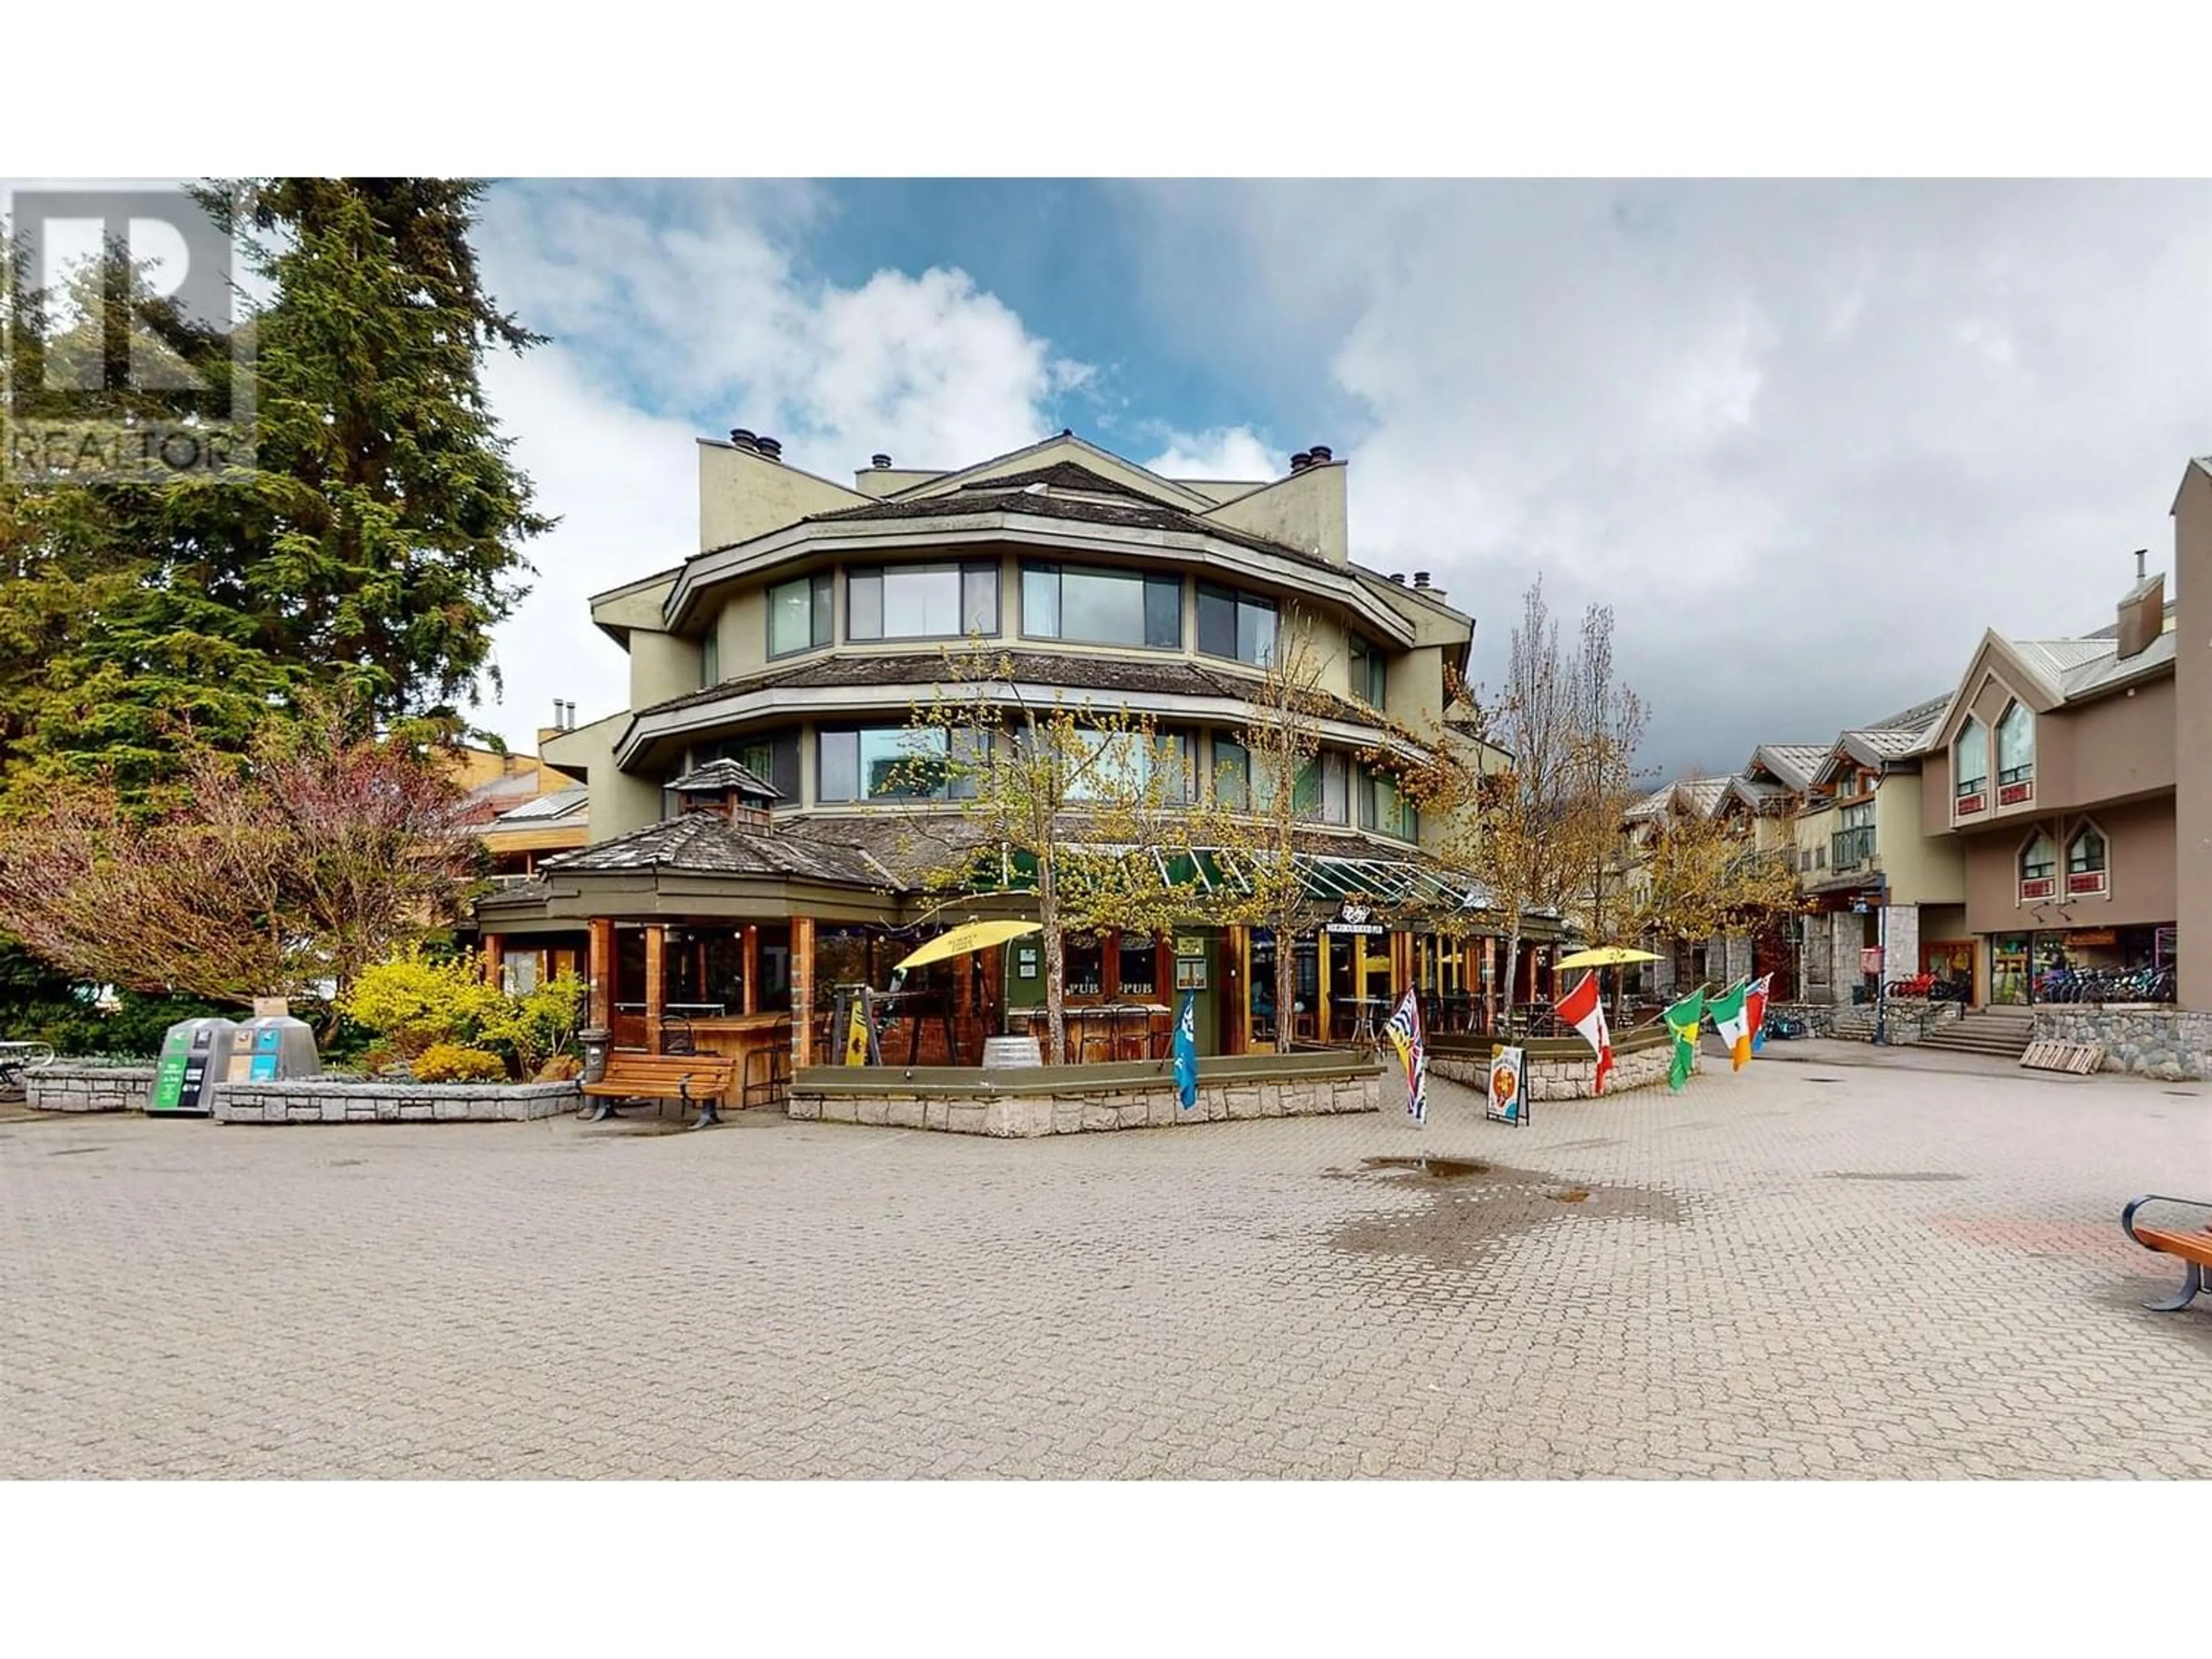 Street view for 301 4111 GOLFERS APPROACH, Whistler British Columbia V8E1A4